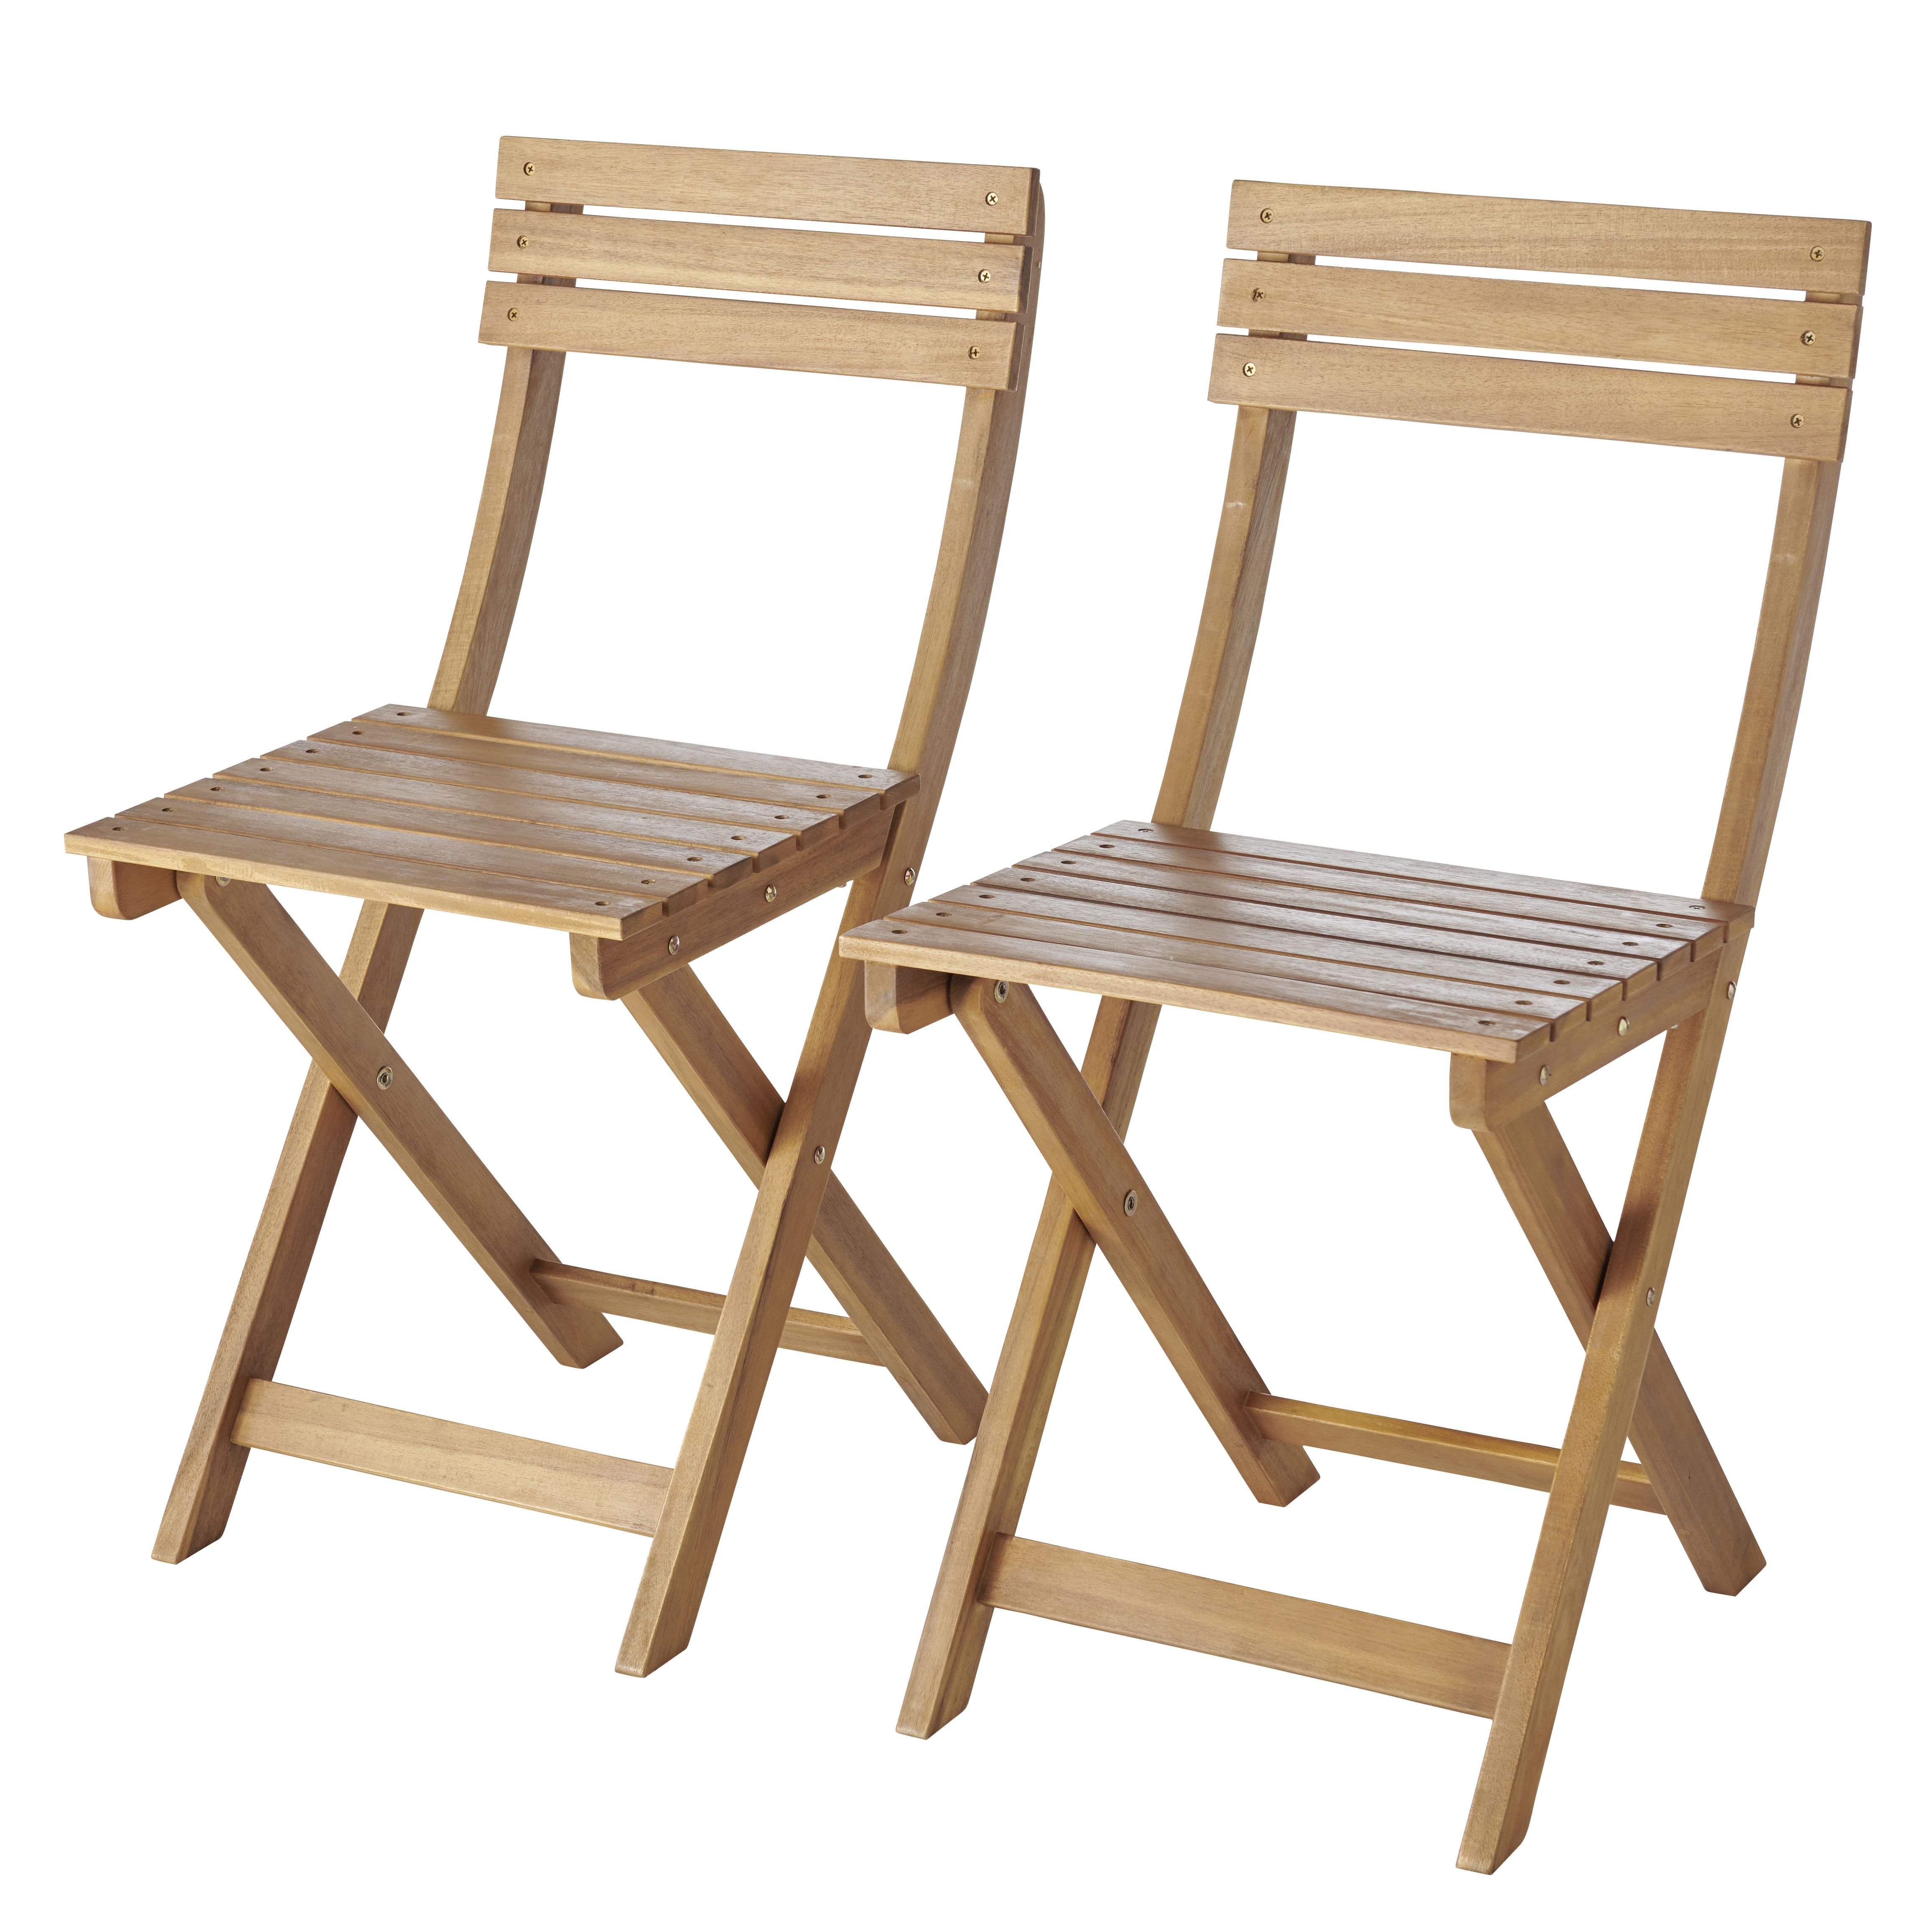 Virginia Wooden Chair, Pack of 2 | DIY at B&Q